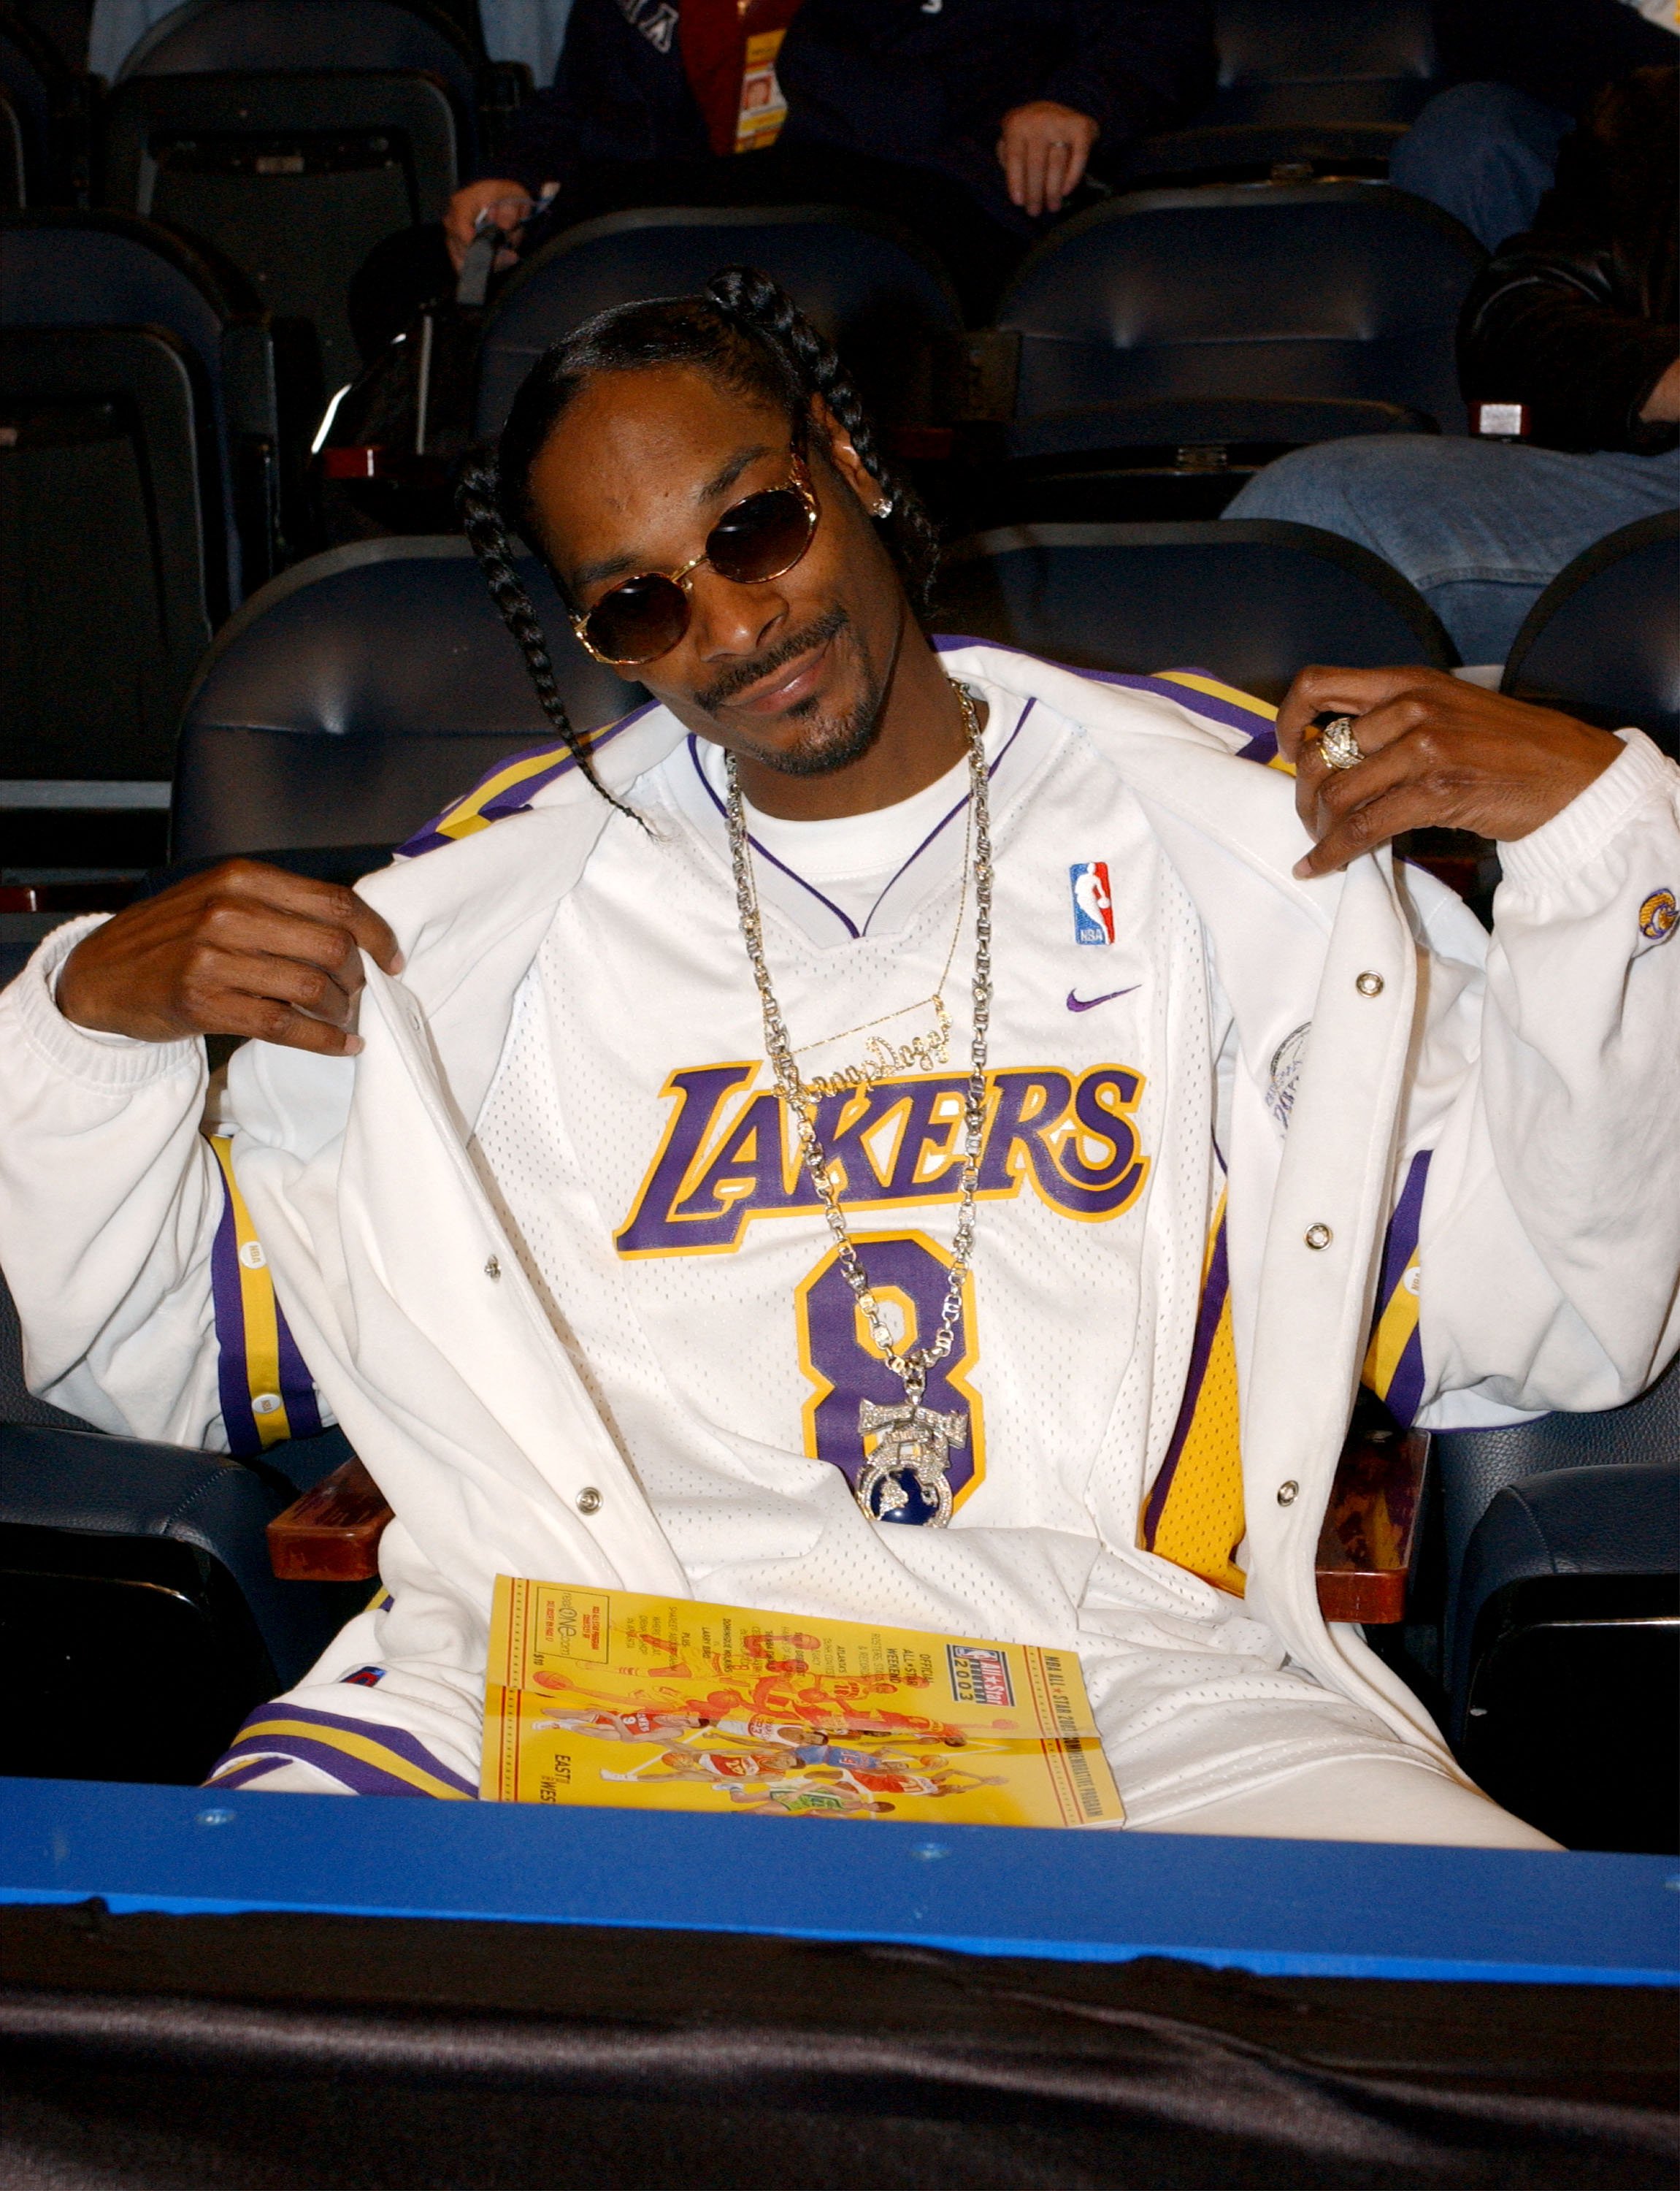 Rapper Snoop Dogg waiting for the beginning of the 2003 NBA All-Star game at the Phillips Arena on February 9, 2003 in Atlanta, Georgia. | Photo: Getty Images